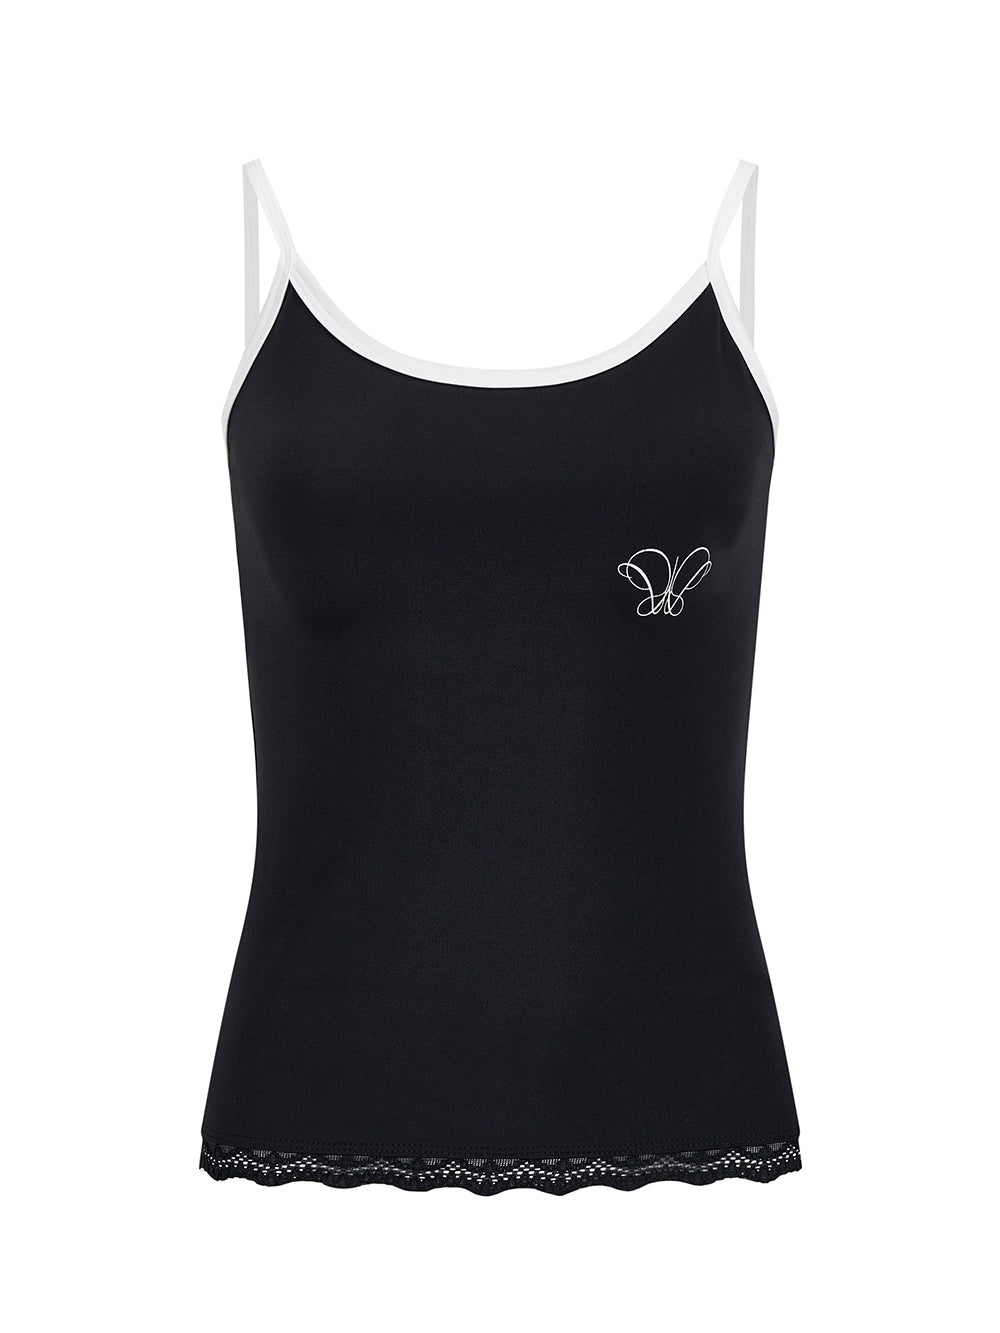 MUKTANK x WESAME Butterfly and Letter Print Lace Camisole Vest